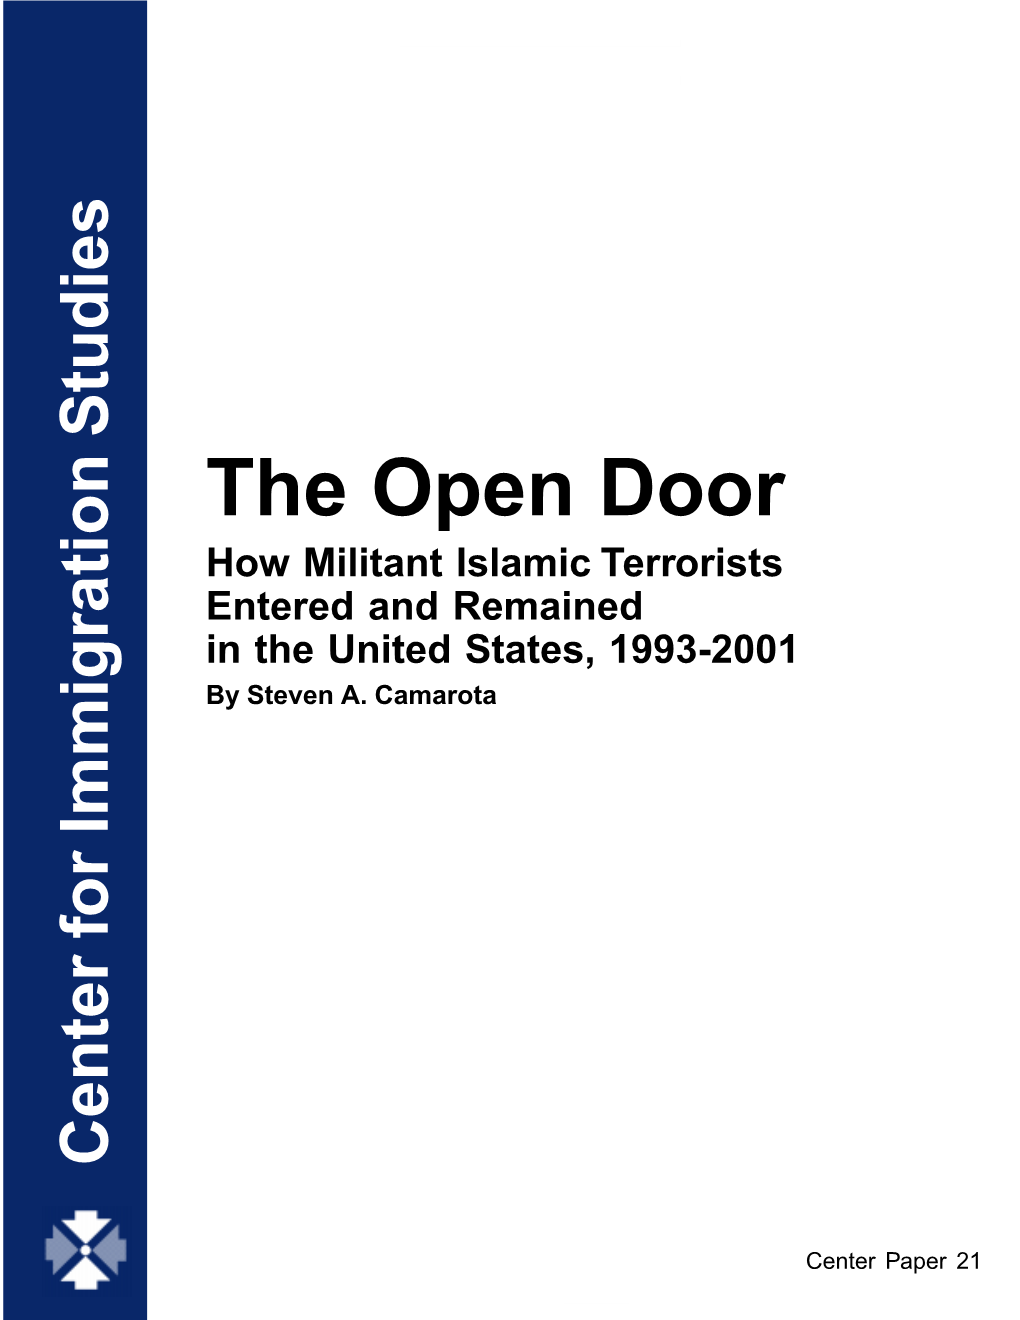 The Open Door How Militant Islamic Terrorists Entered and Remained in the United States, 1993-2001 by Steven A